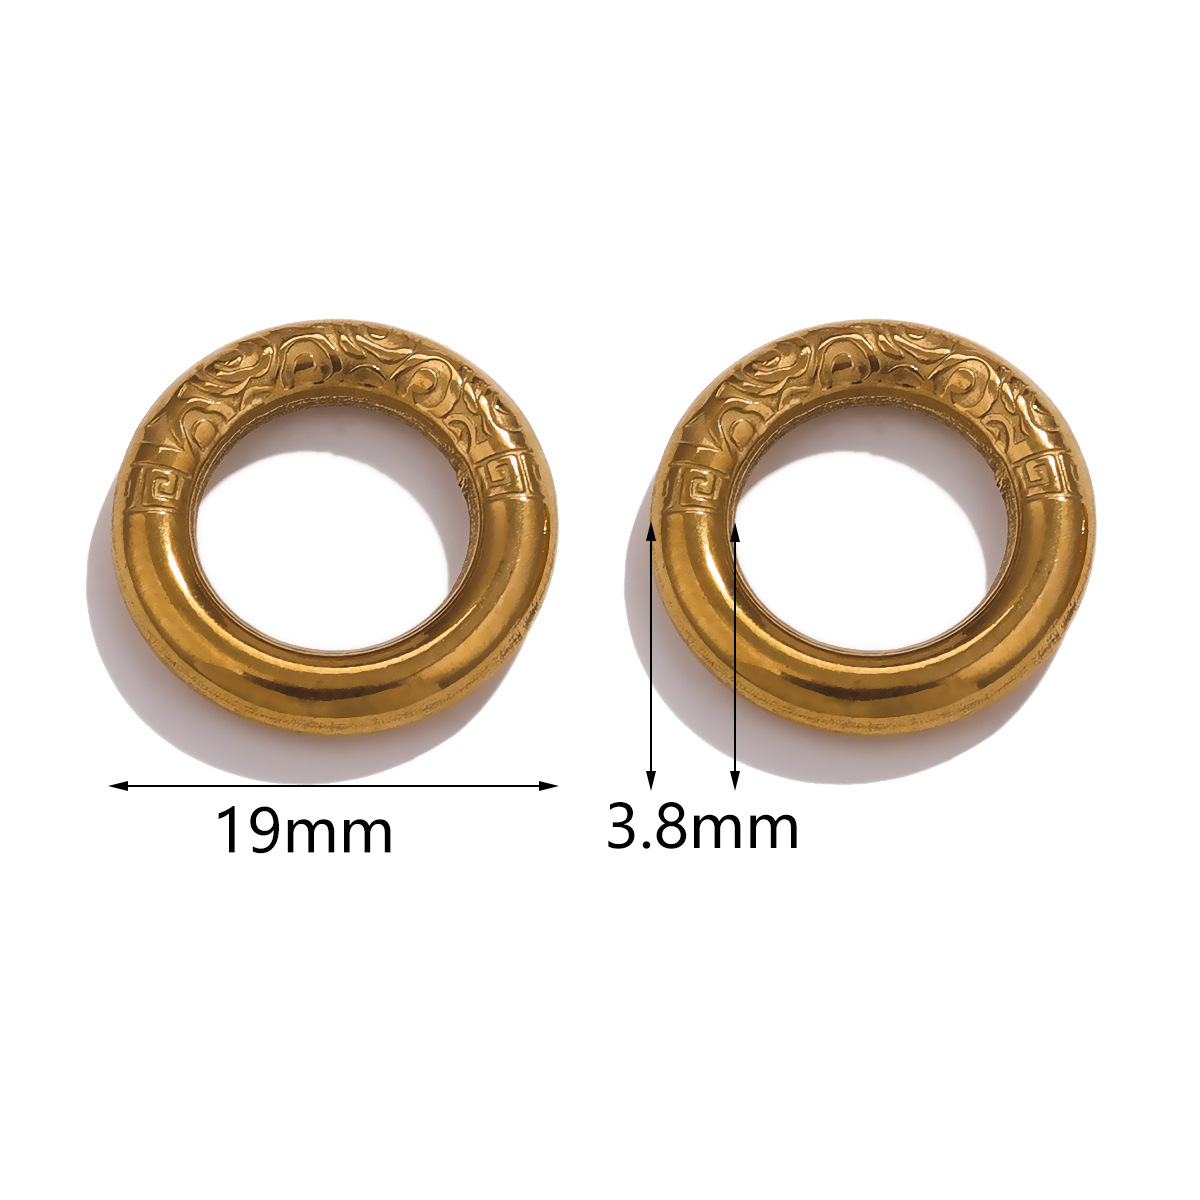 19mm - Gold